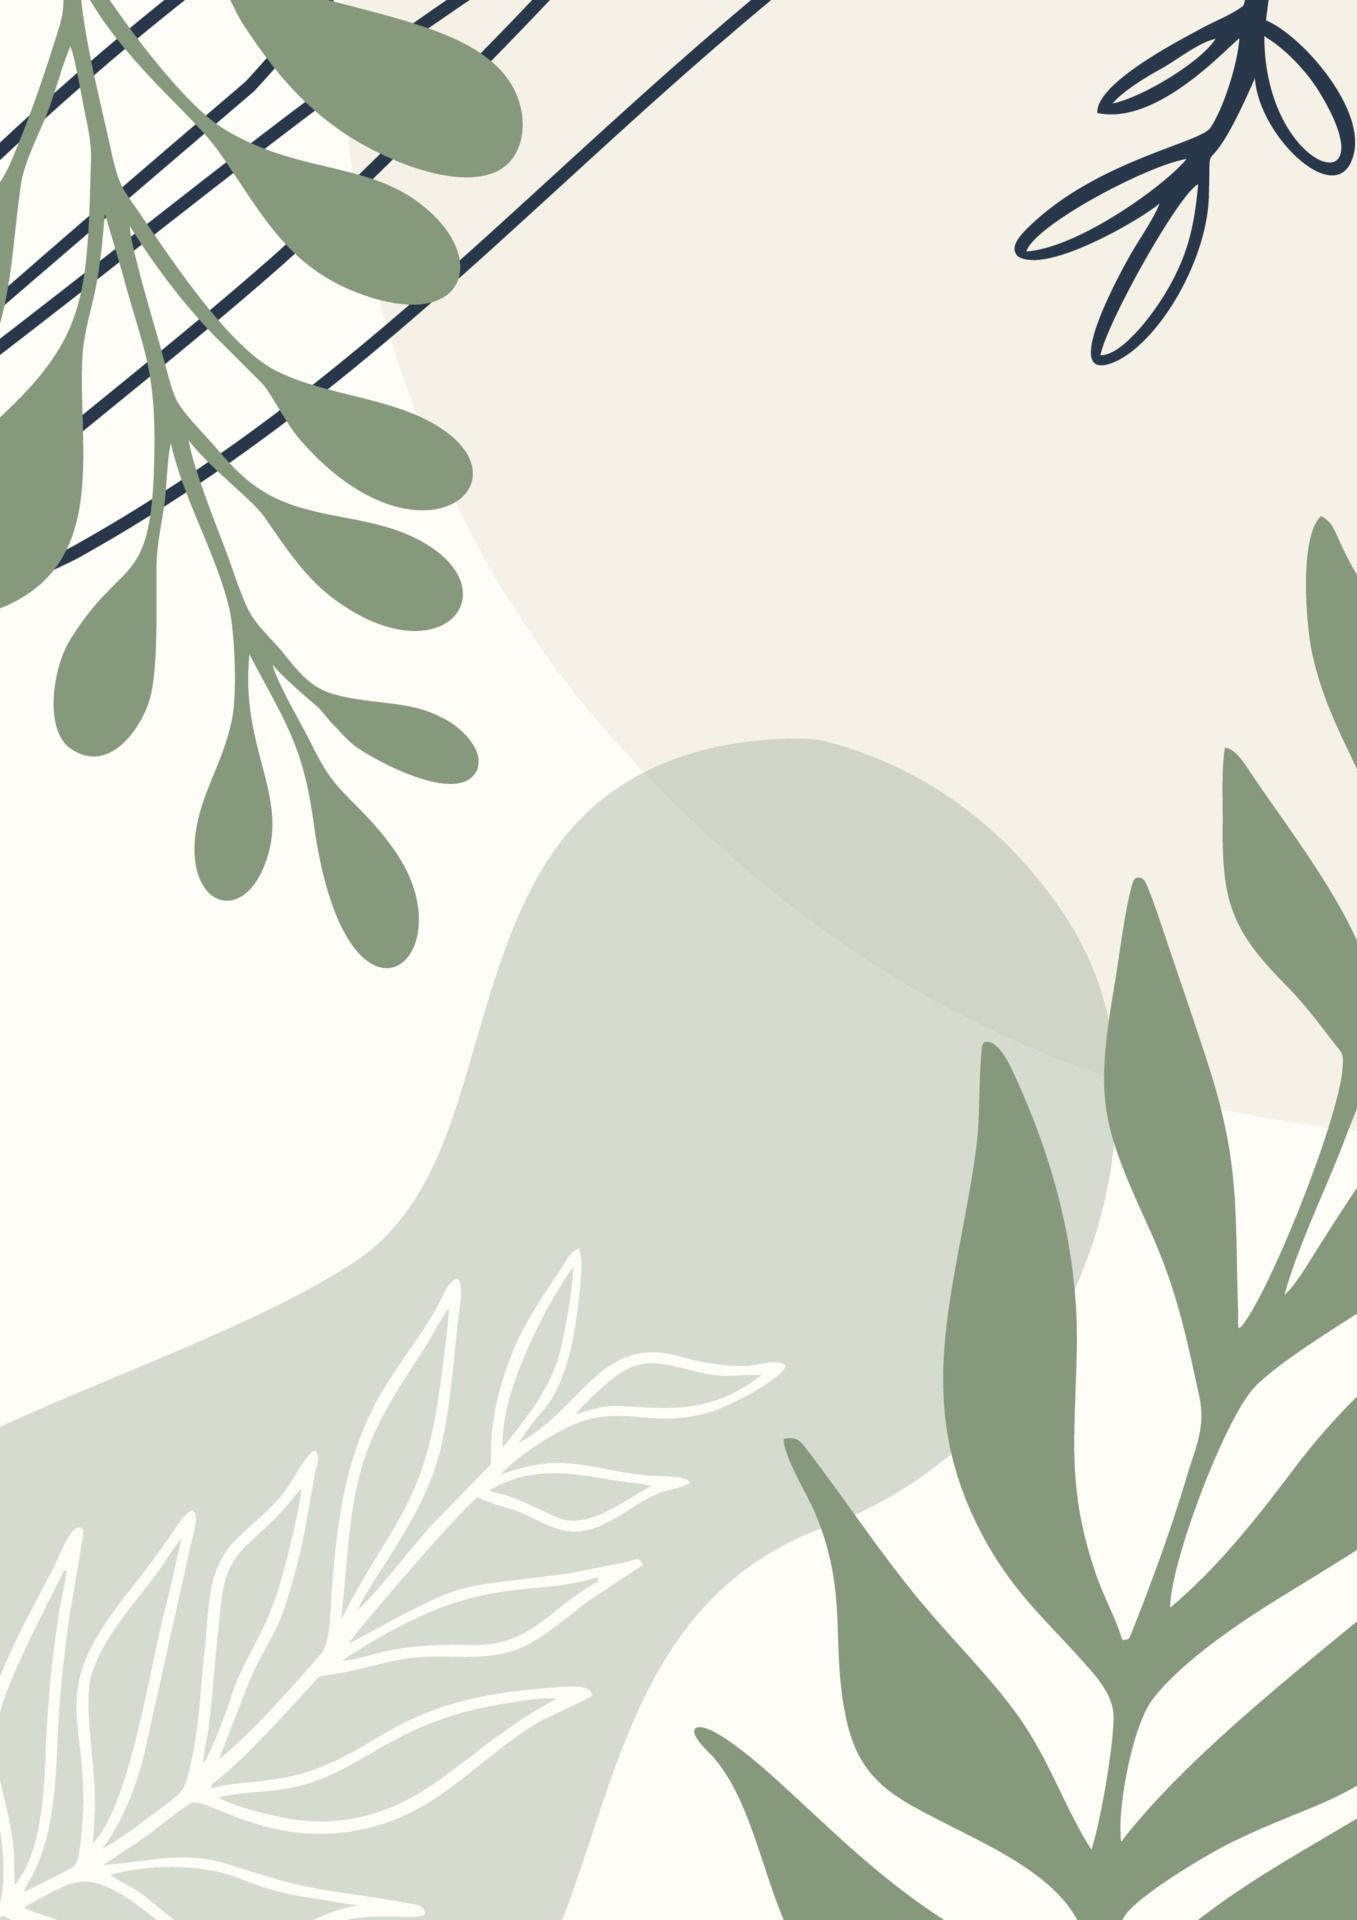 A graphic with abstract shapes and green leaves - Pastel minimalist